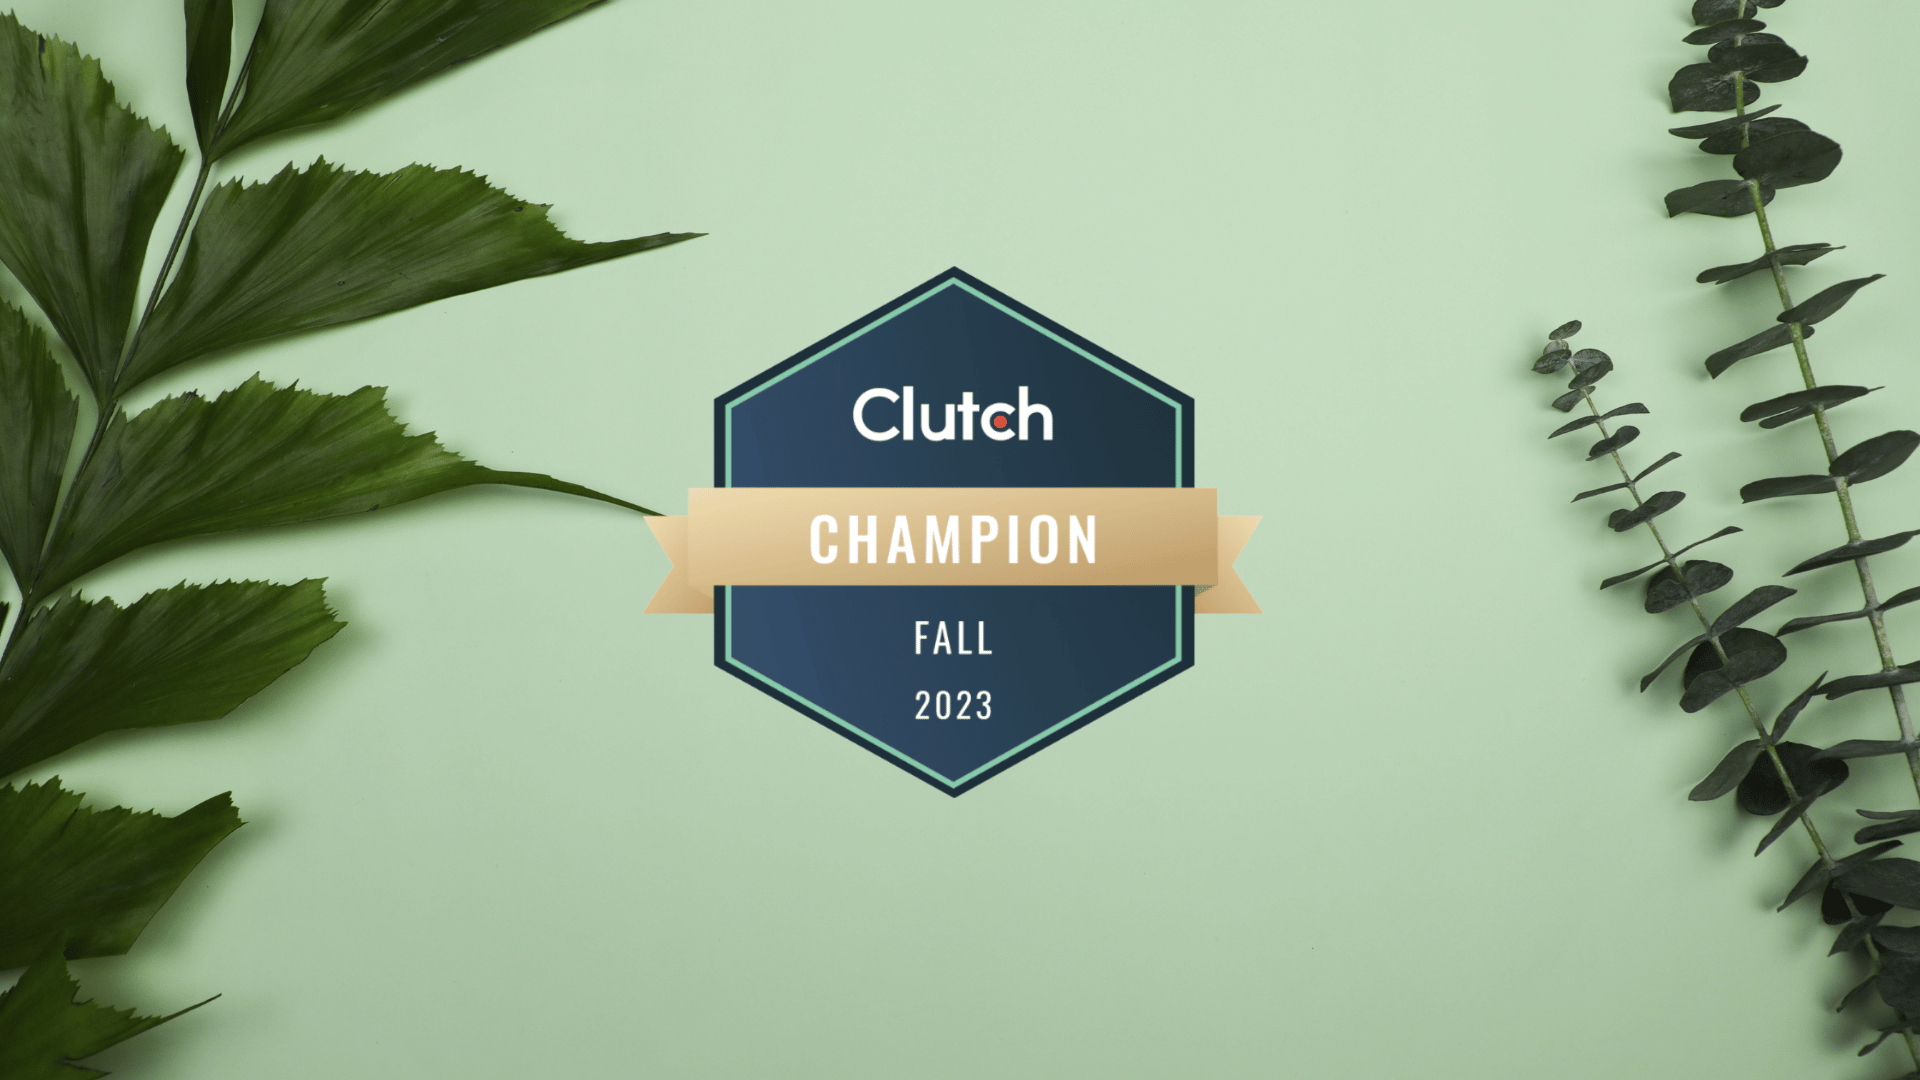 CrewBloom Honored as a Clutch Champion for 2023